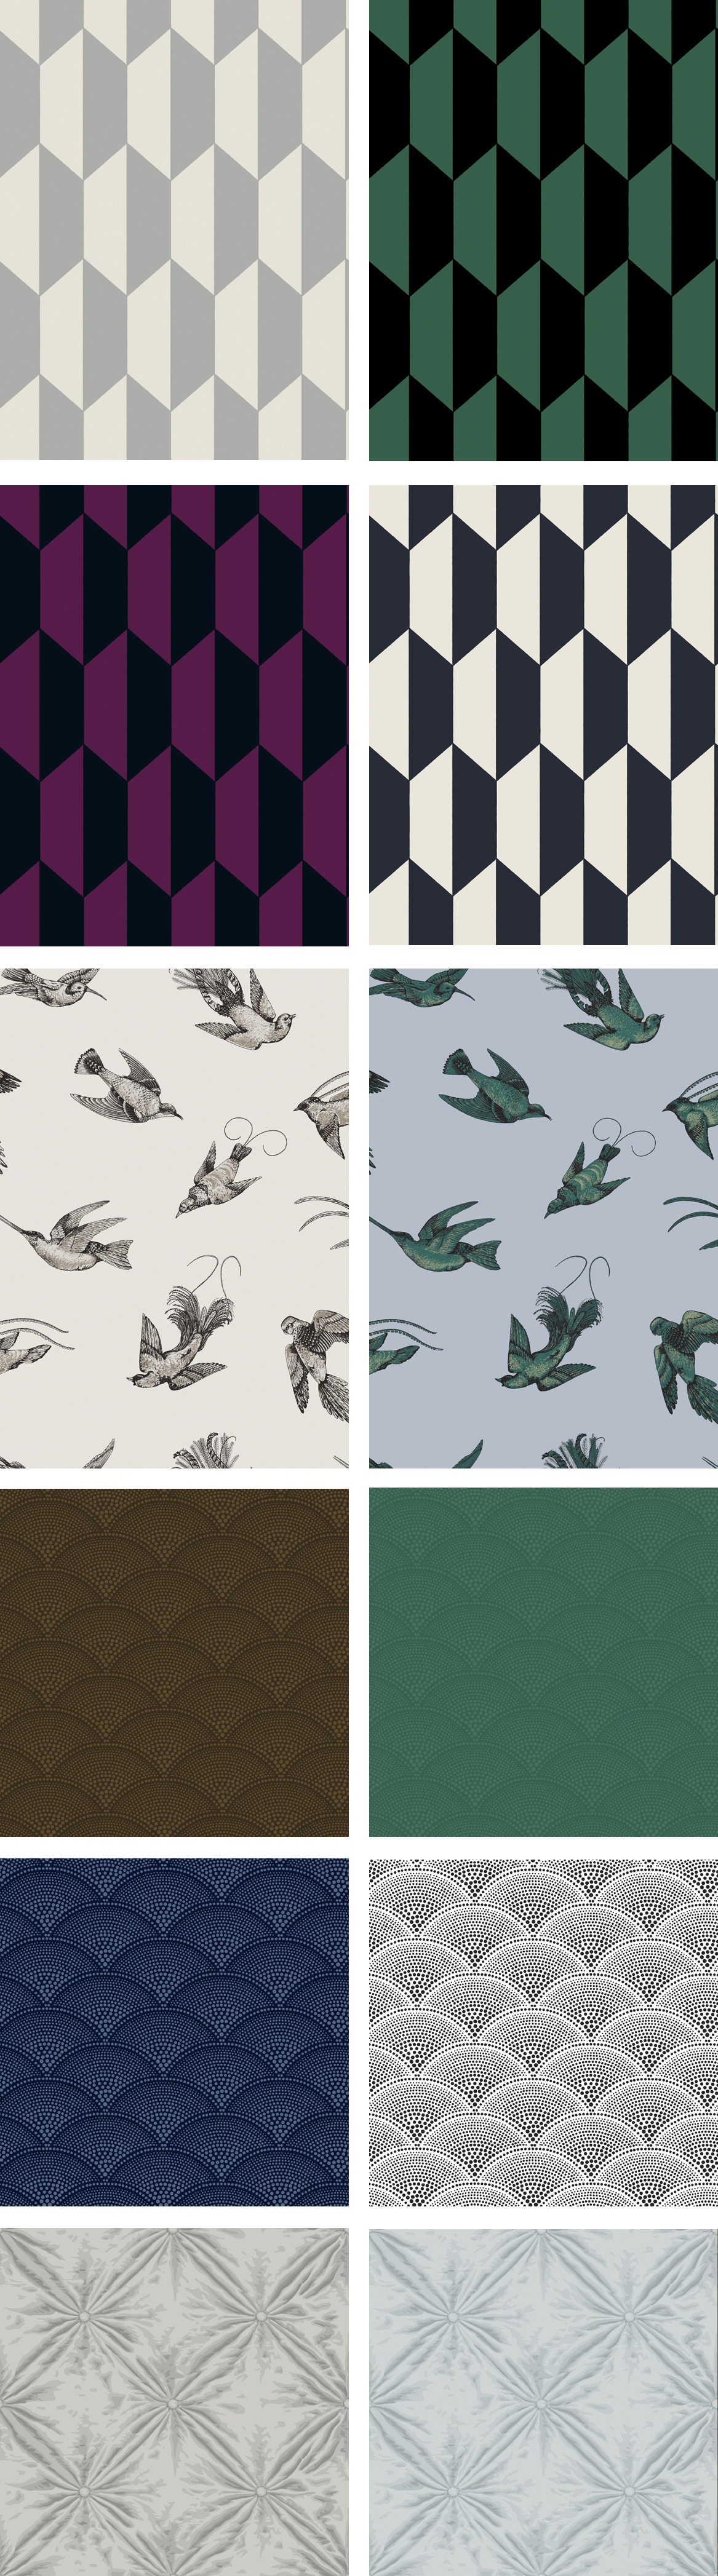 NEW: Cole & Son wallpapers « HomeShoppingSpy